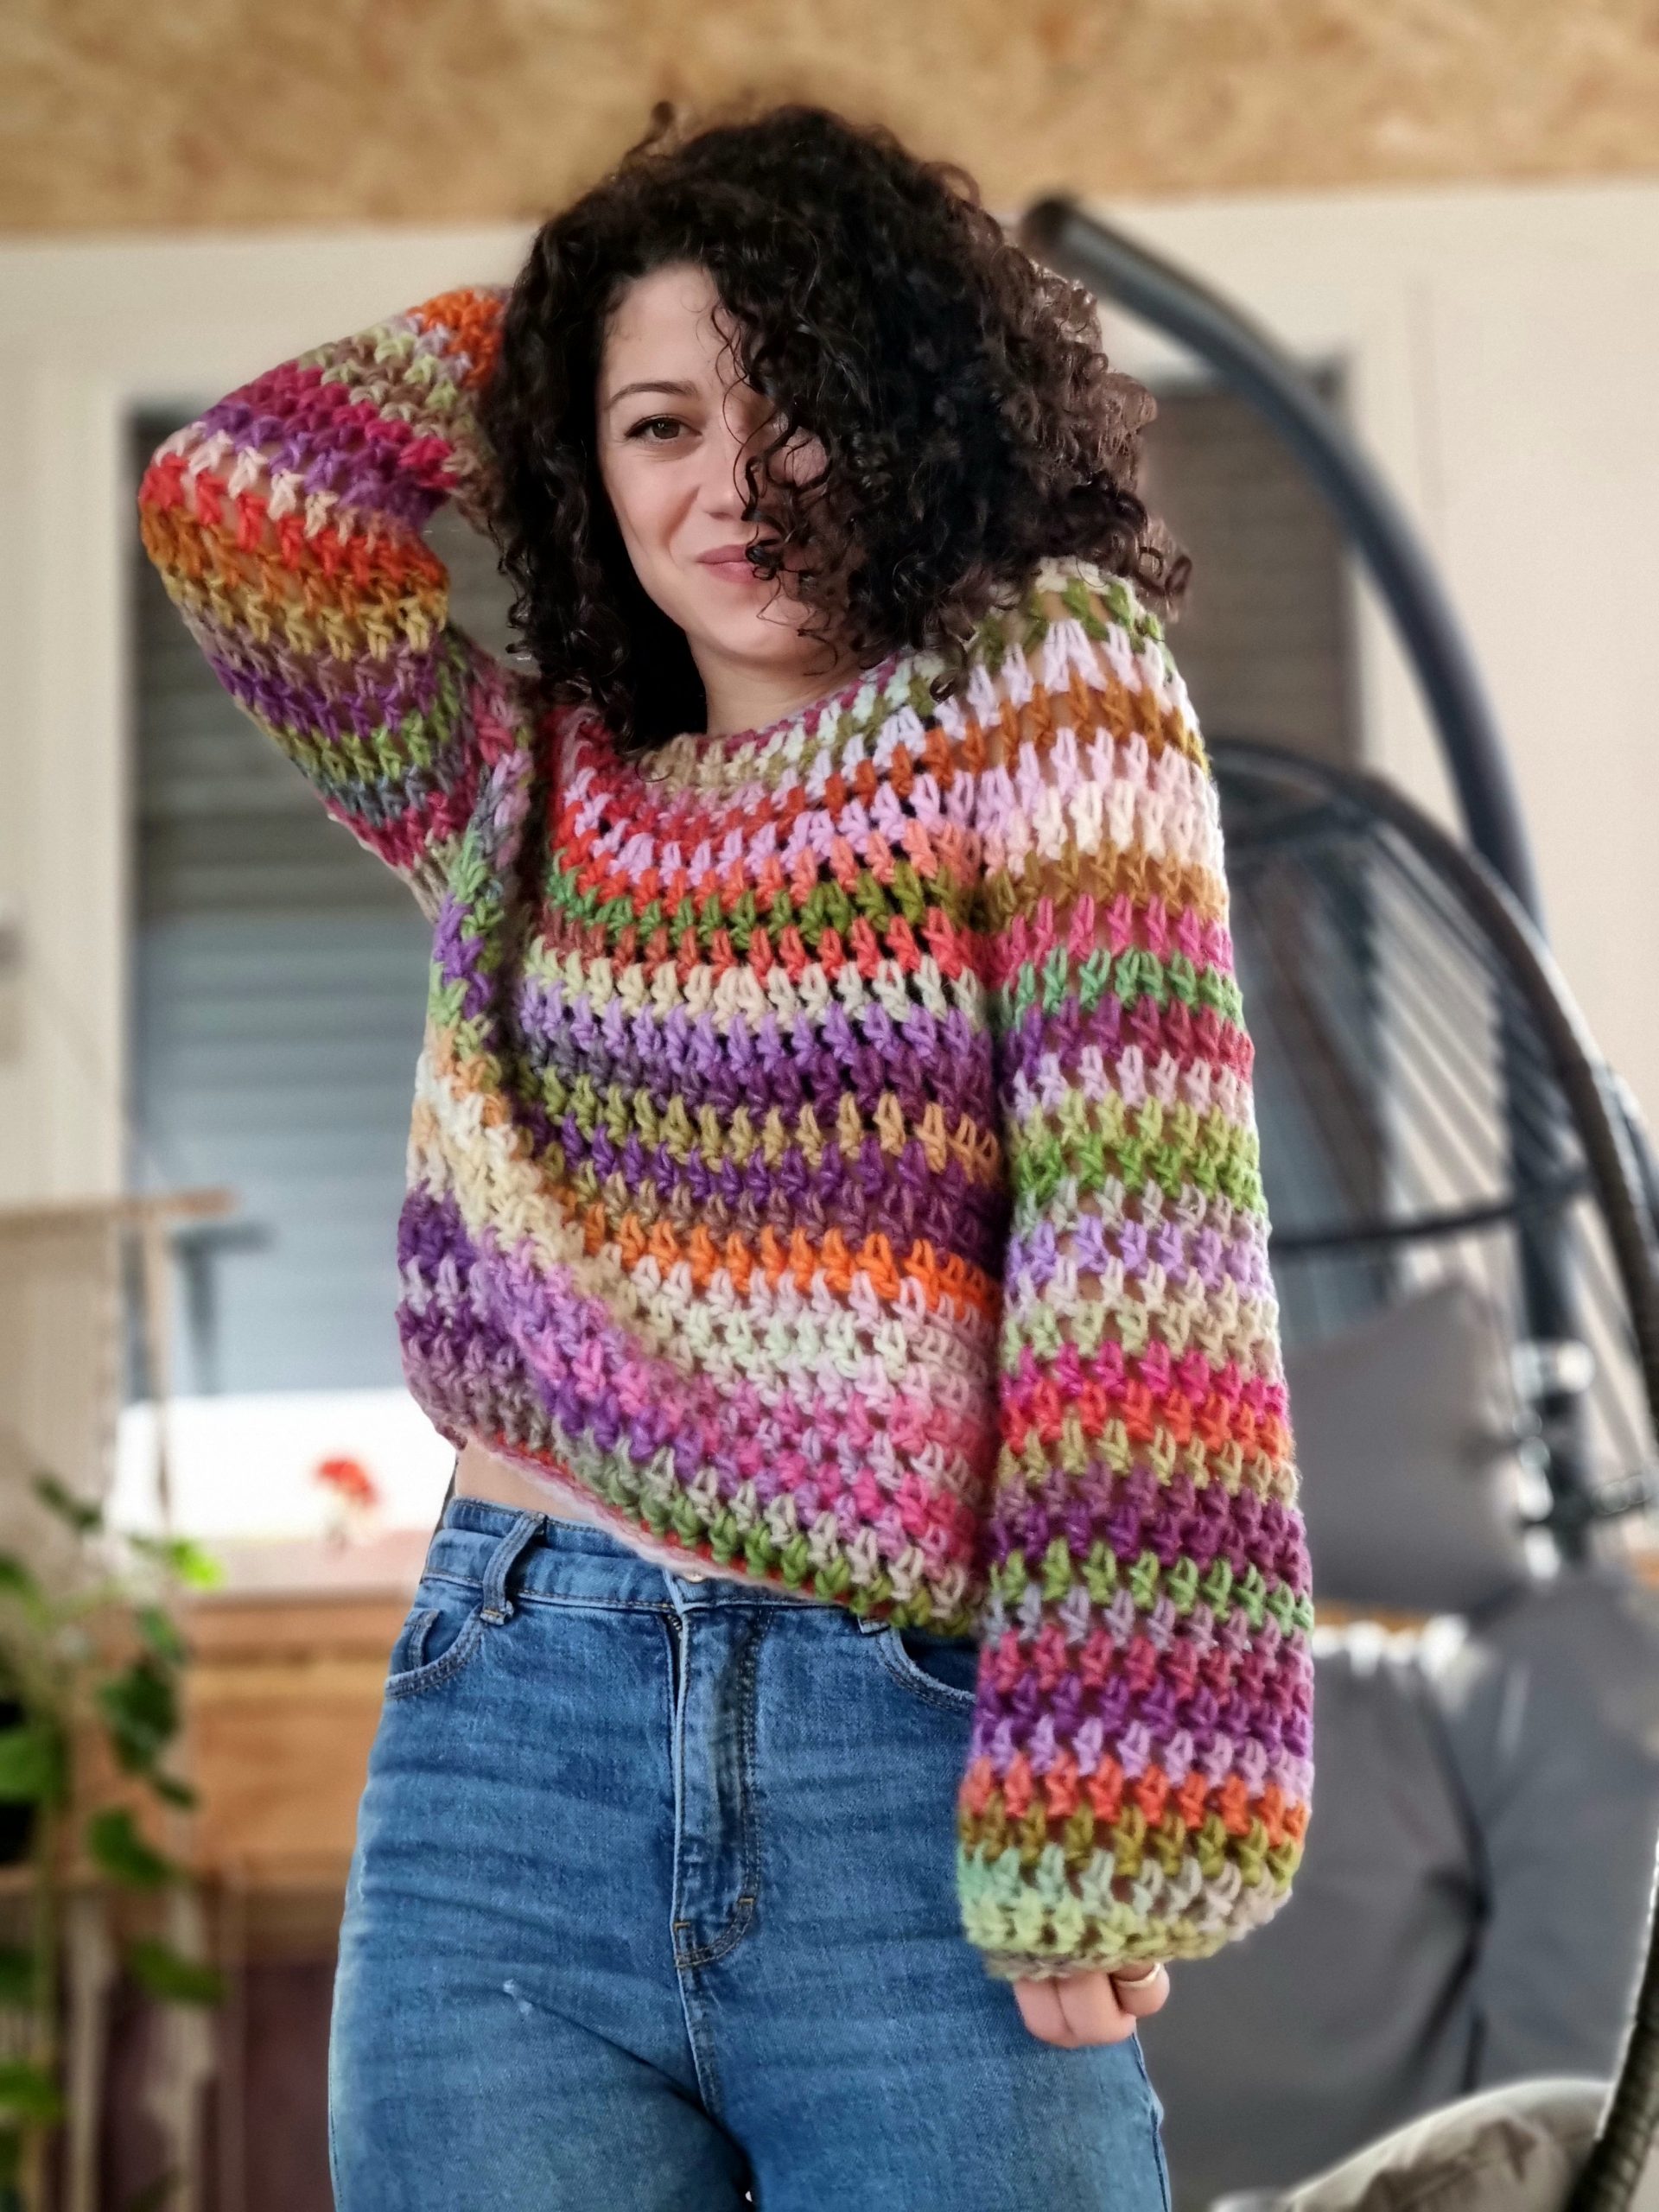 Making a Statement with a Crochet Sweater